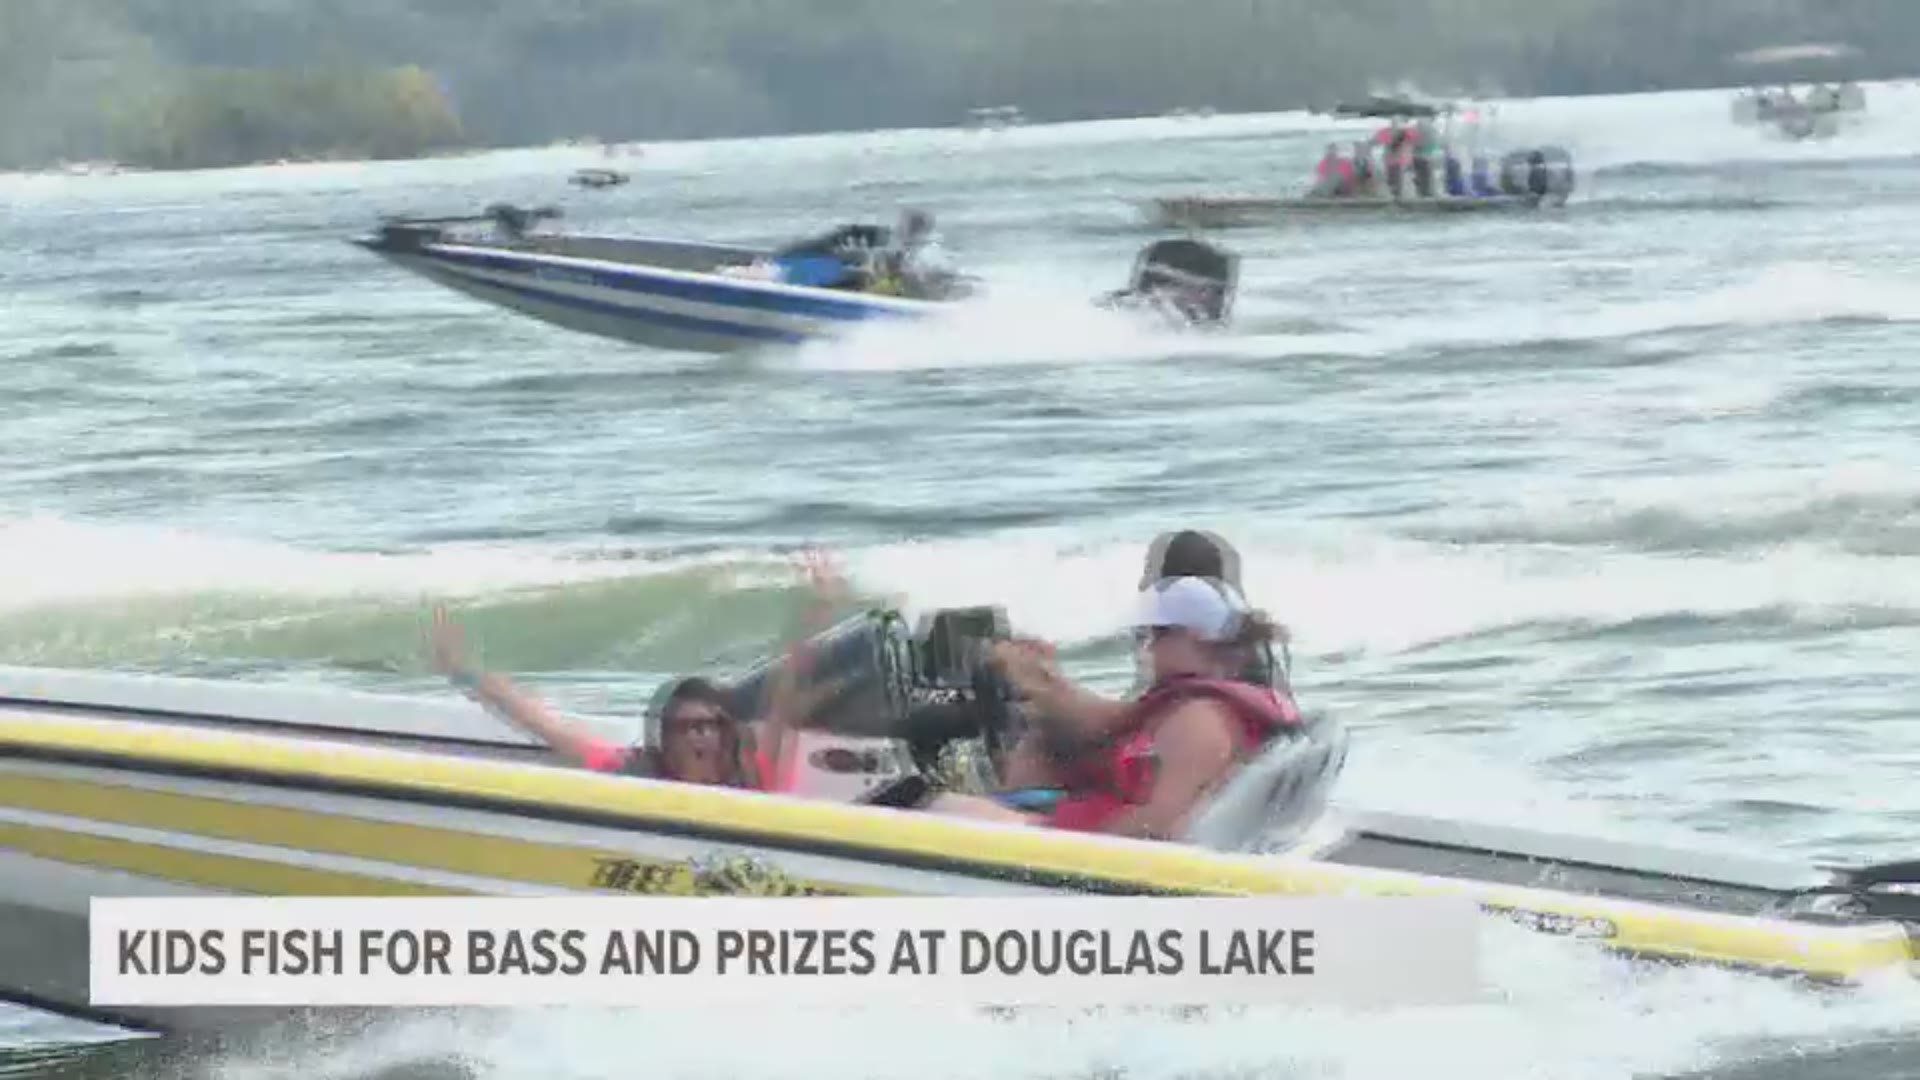 400 teams of adults and children competed in the 29th annual kids bass fishing tournament by Mountain Music at Douglas Lake.